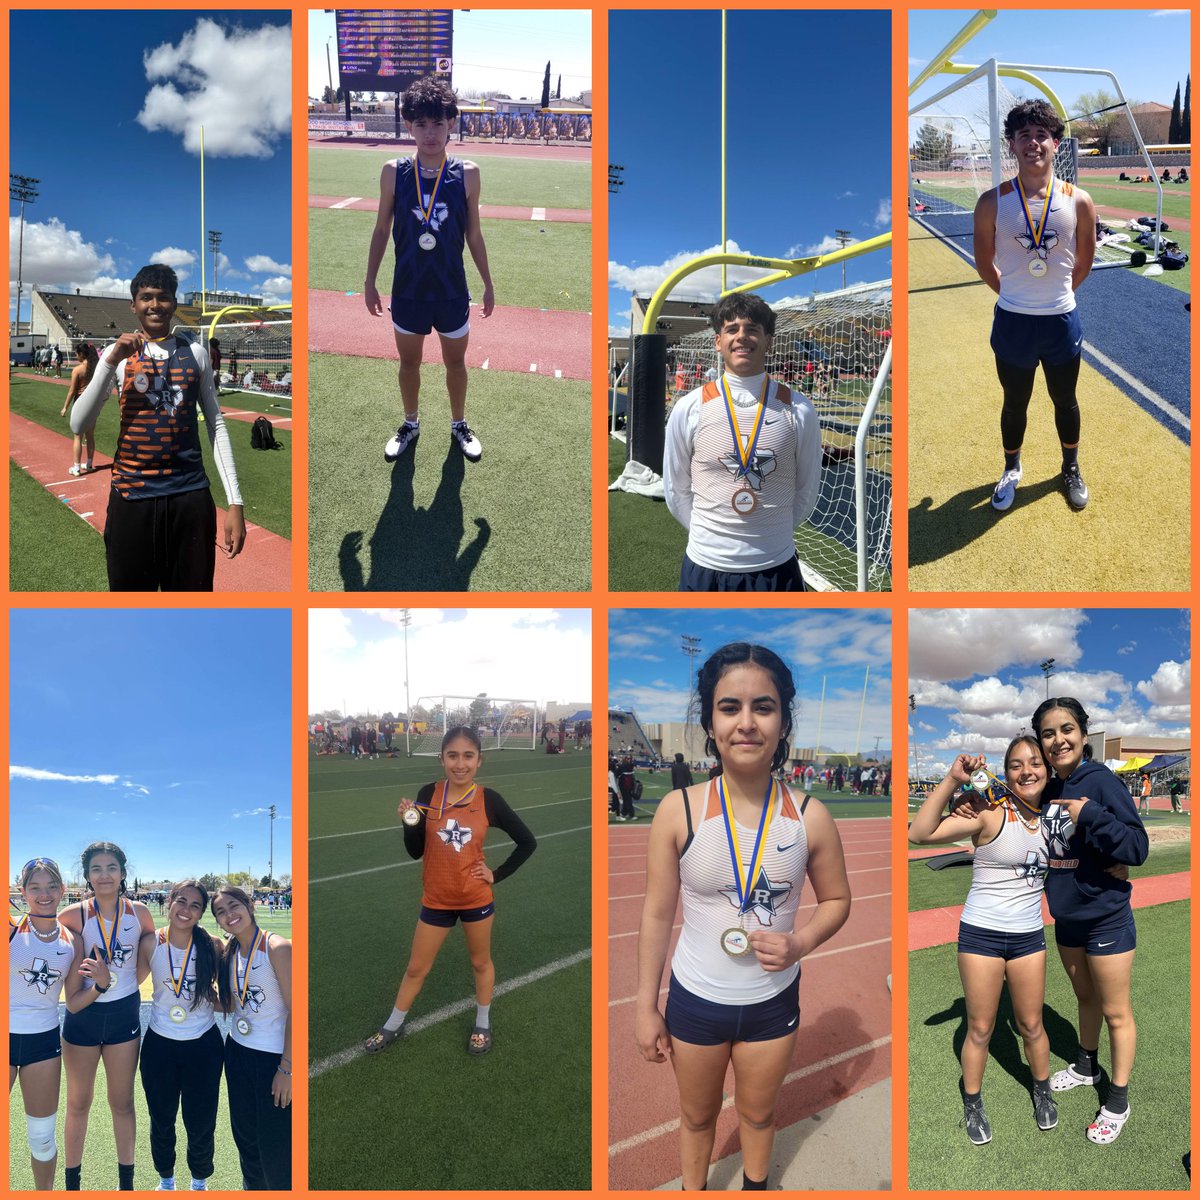 Thanks again to Eastwood T&F for hosting a great meet at the Fred Loya Invite! All freshmen medalists 👀, future is bright for our Rangers ⚡🐆 #riverside4ever